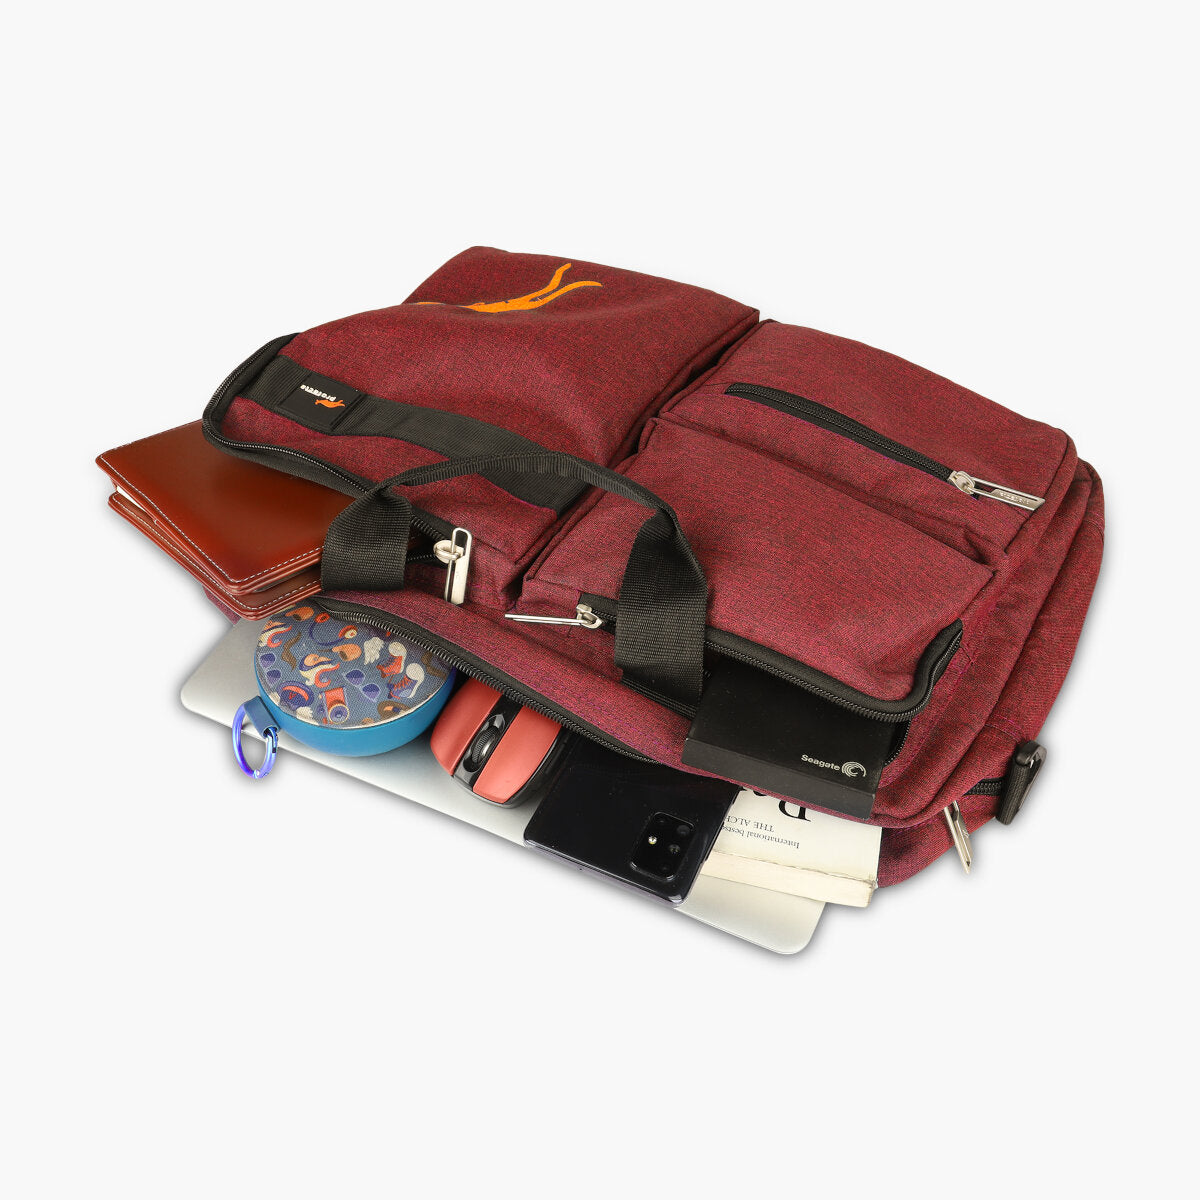 Rust Red, Protecta Leap Laptop Office Bag-1